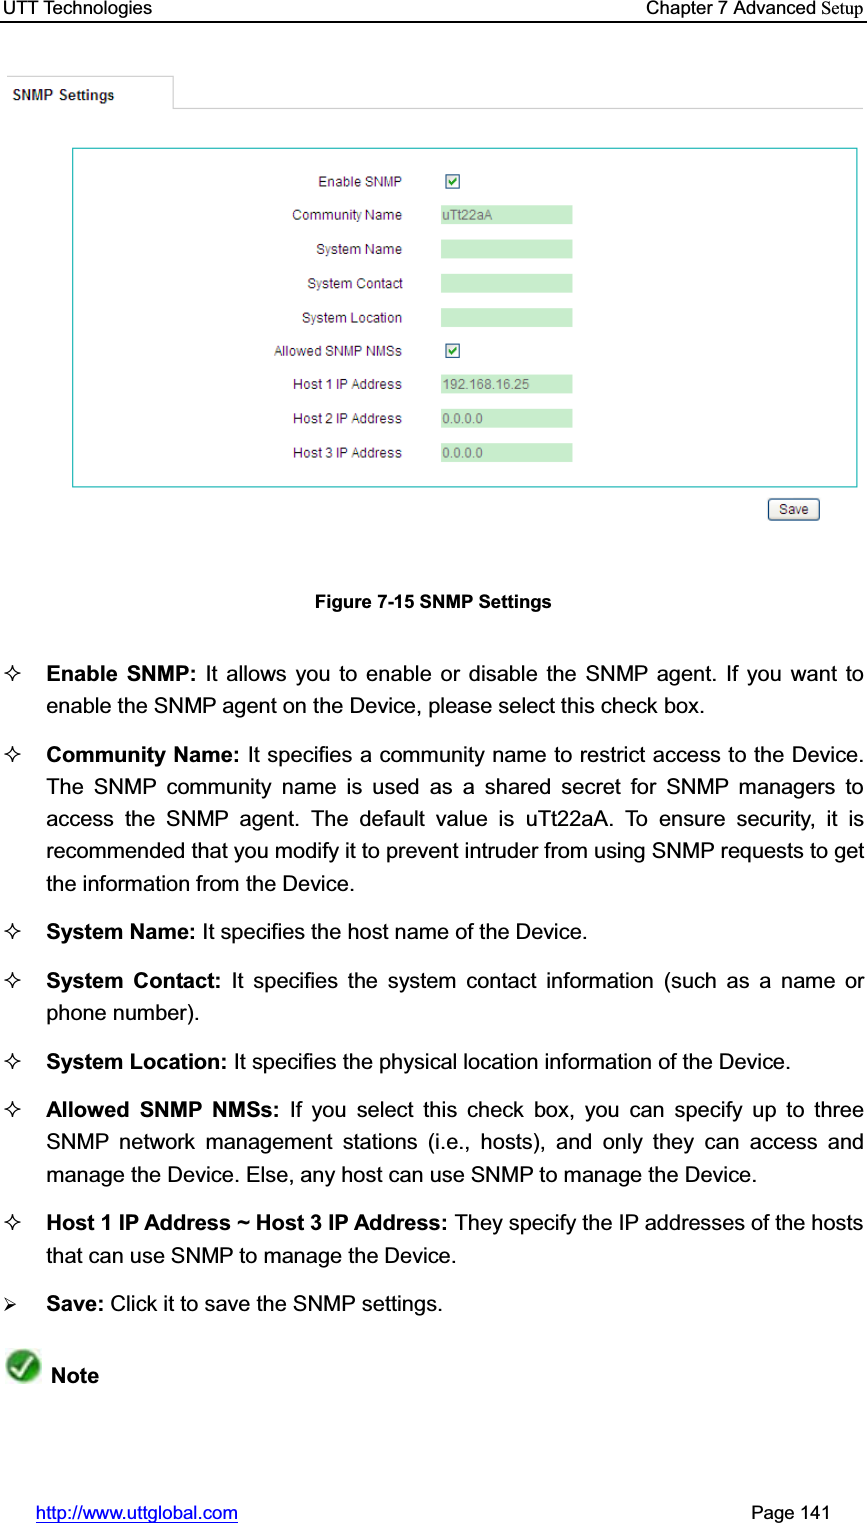 UTT Technologies    Chapter 7 Advanced Setuphttp://www.uttglobal.com                                                       Page 141 Figure 7-15 SNMP Settings Enable SNMP: It allows you to enable or disable the SNMP agent. If you want to enable the SNMP agent on the Device, please select this check box.   Community Name: It specifies a community name to restrict access to the Device. The SNMP community name is used as a shared secret for SNMP managers to access the SNMP agent. The default value is uTt22aA. To ensure security, it is recommended that you modify it to prevent intruder from using SNMP requests to get the information from the Device. System Name: It specifies the host name of the Device. System Contact: It specifies the system contact information (such as a name or phone number). System Location: It specifies the physical location information of the Device. Allowed SNMP NMSs: If you select this check box, you can specify up to three SNMP network management stations (i.e., hosts), and only they can access and manage the Device. Else, any host can use SNMP to manage the Device. Host 1 IP Address ~ Host 3 IP Address: They specify the IP addresses of the hosts that can use SNMP to manage the Device.¾Save: Click it to save the SNMP settings.Note